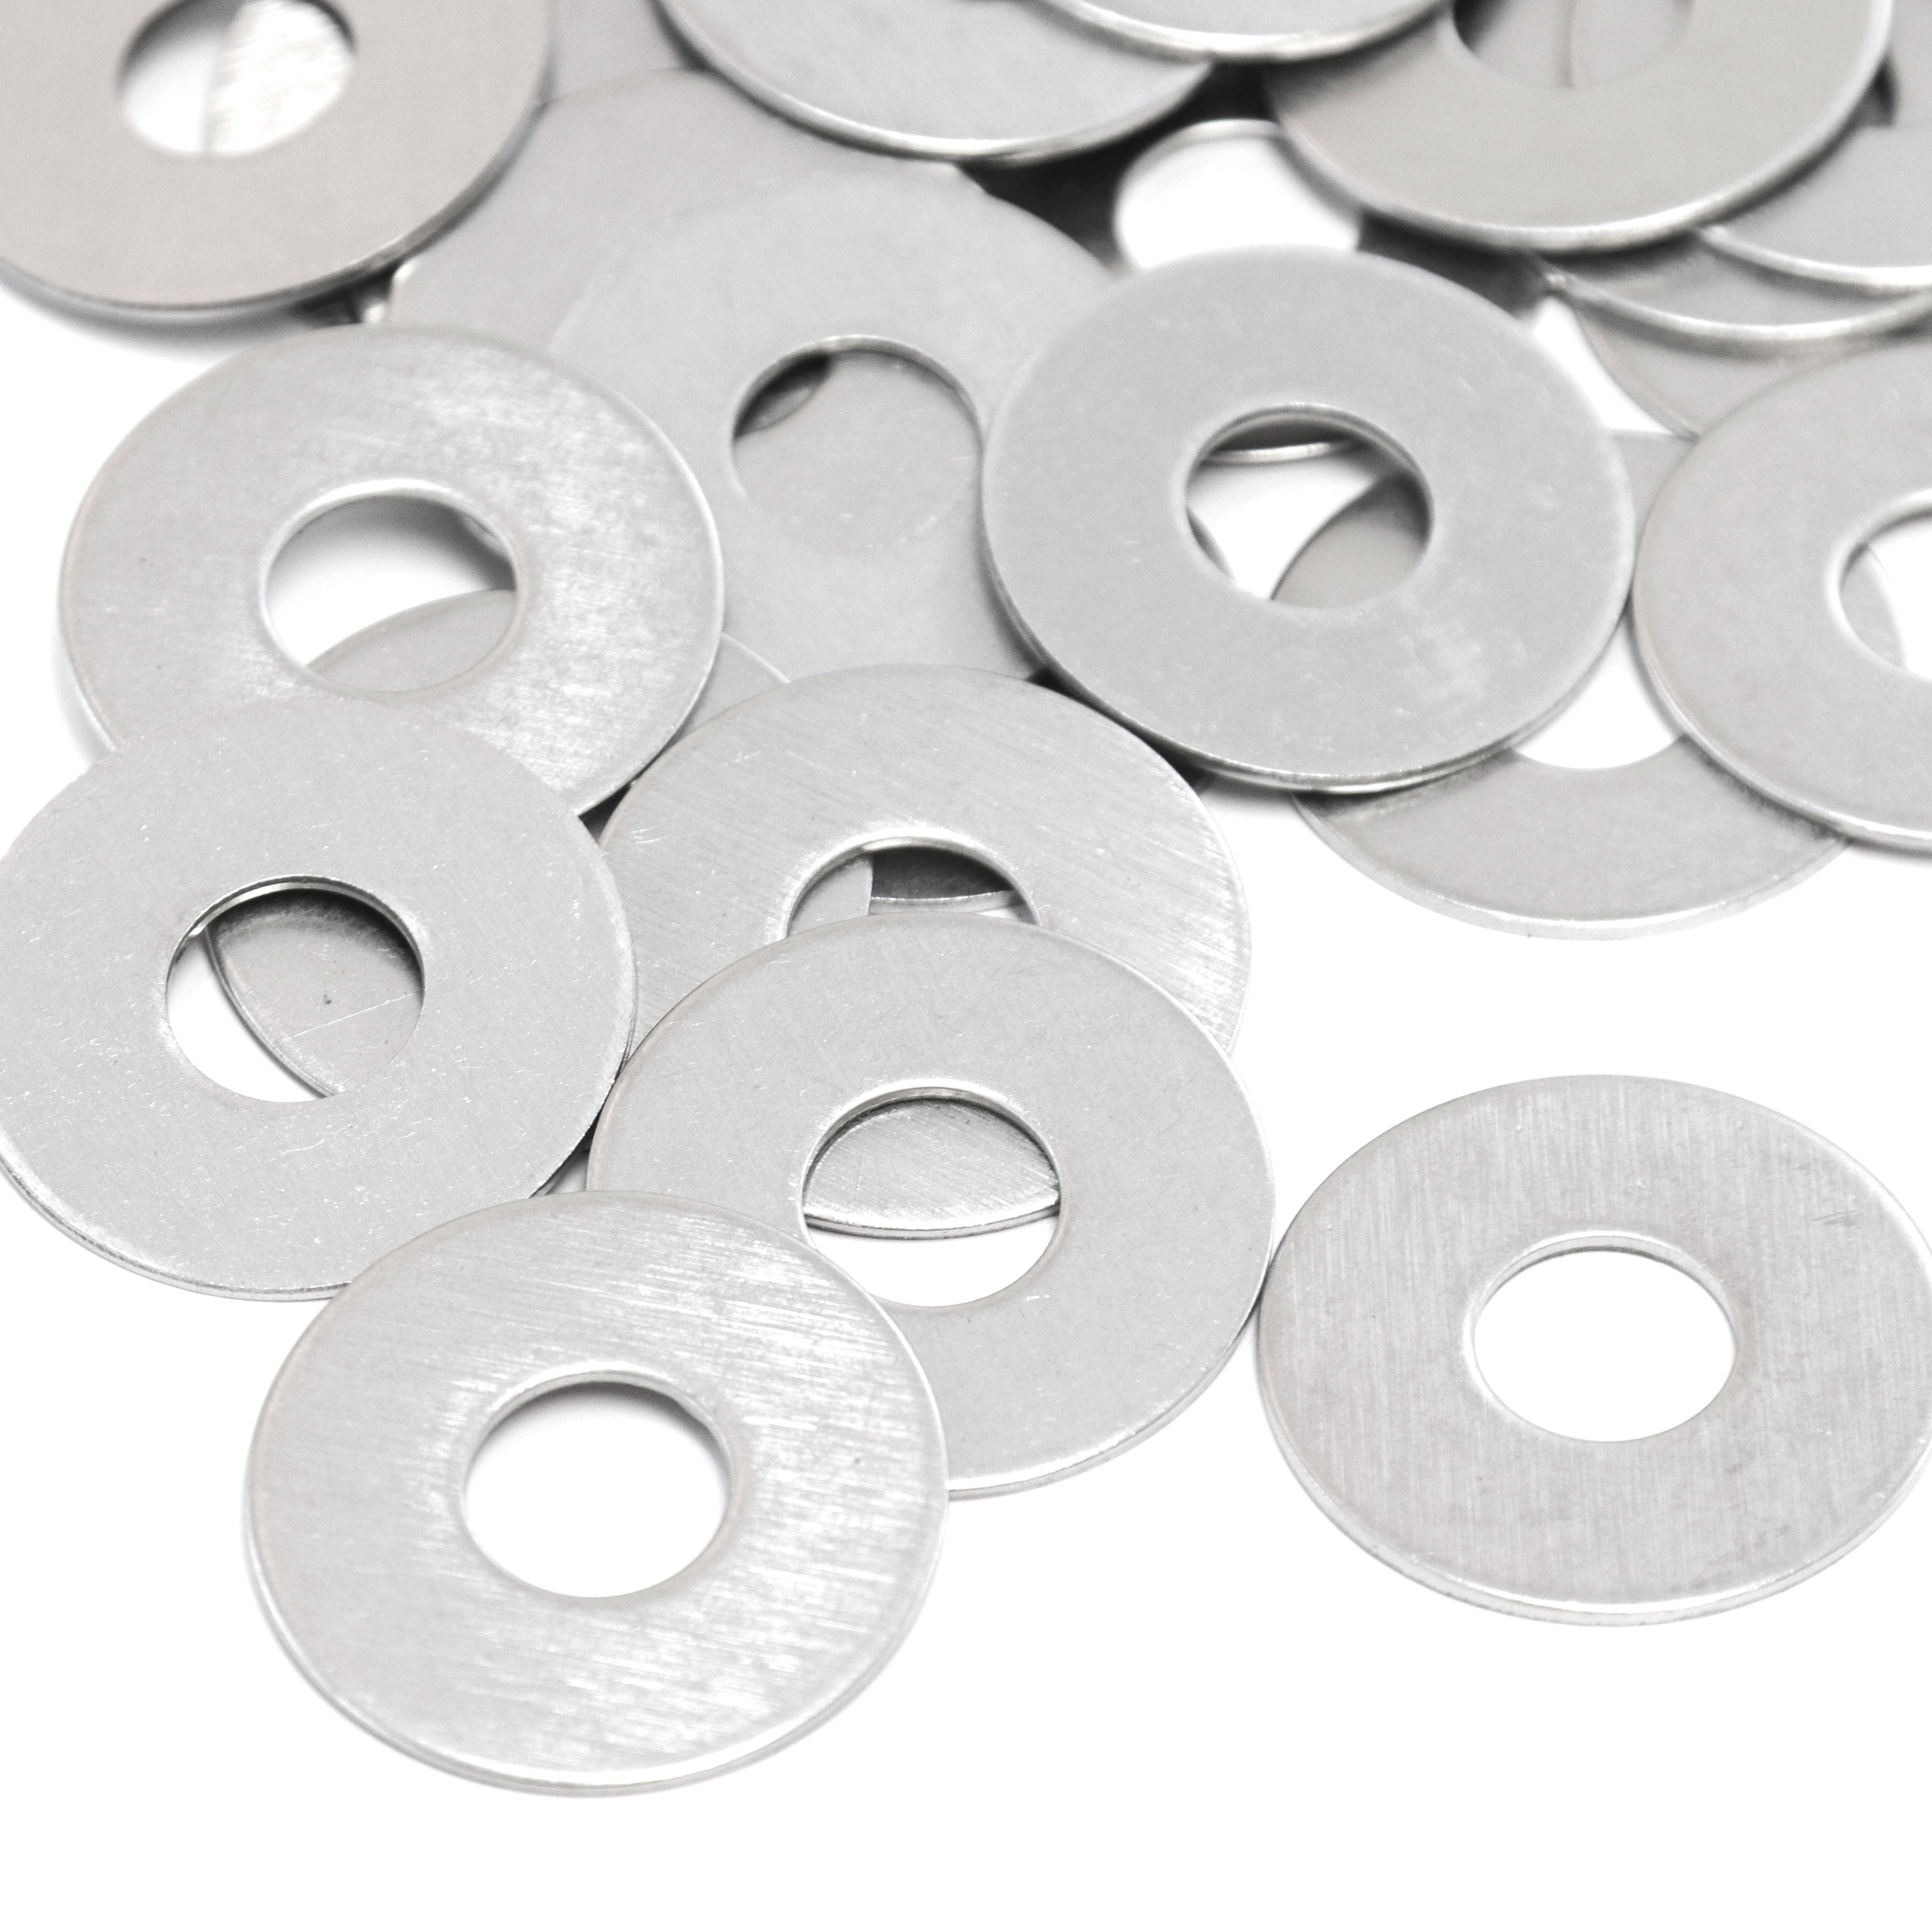 10 Flat Washers .531" ID Hole 1/2" x 1-1/2" 304 SS Stainless Steel Hardware Set 